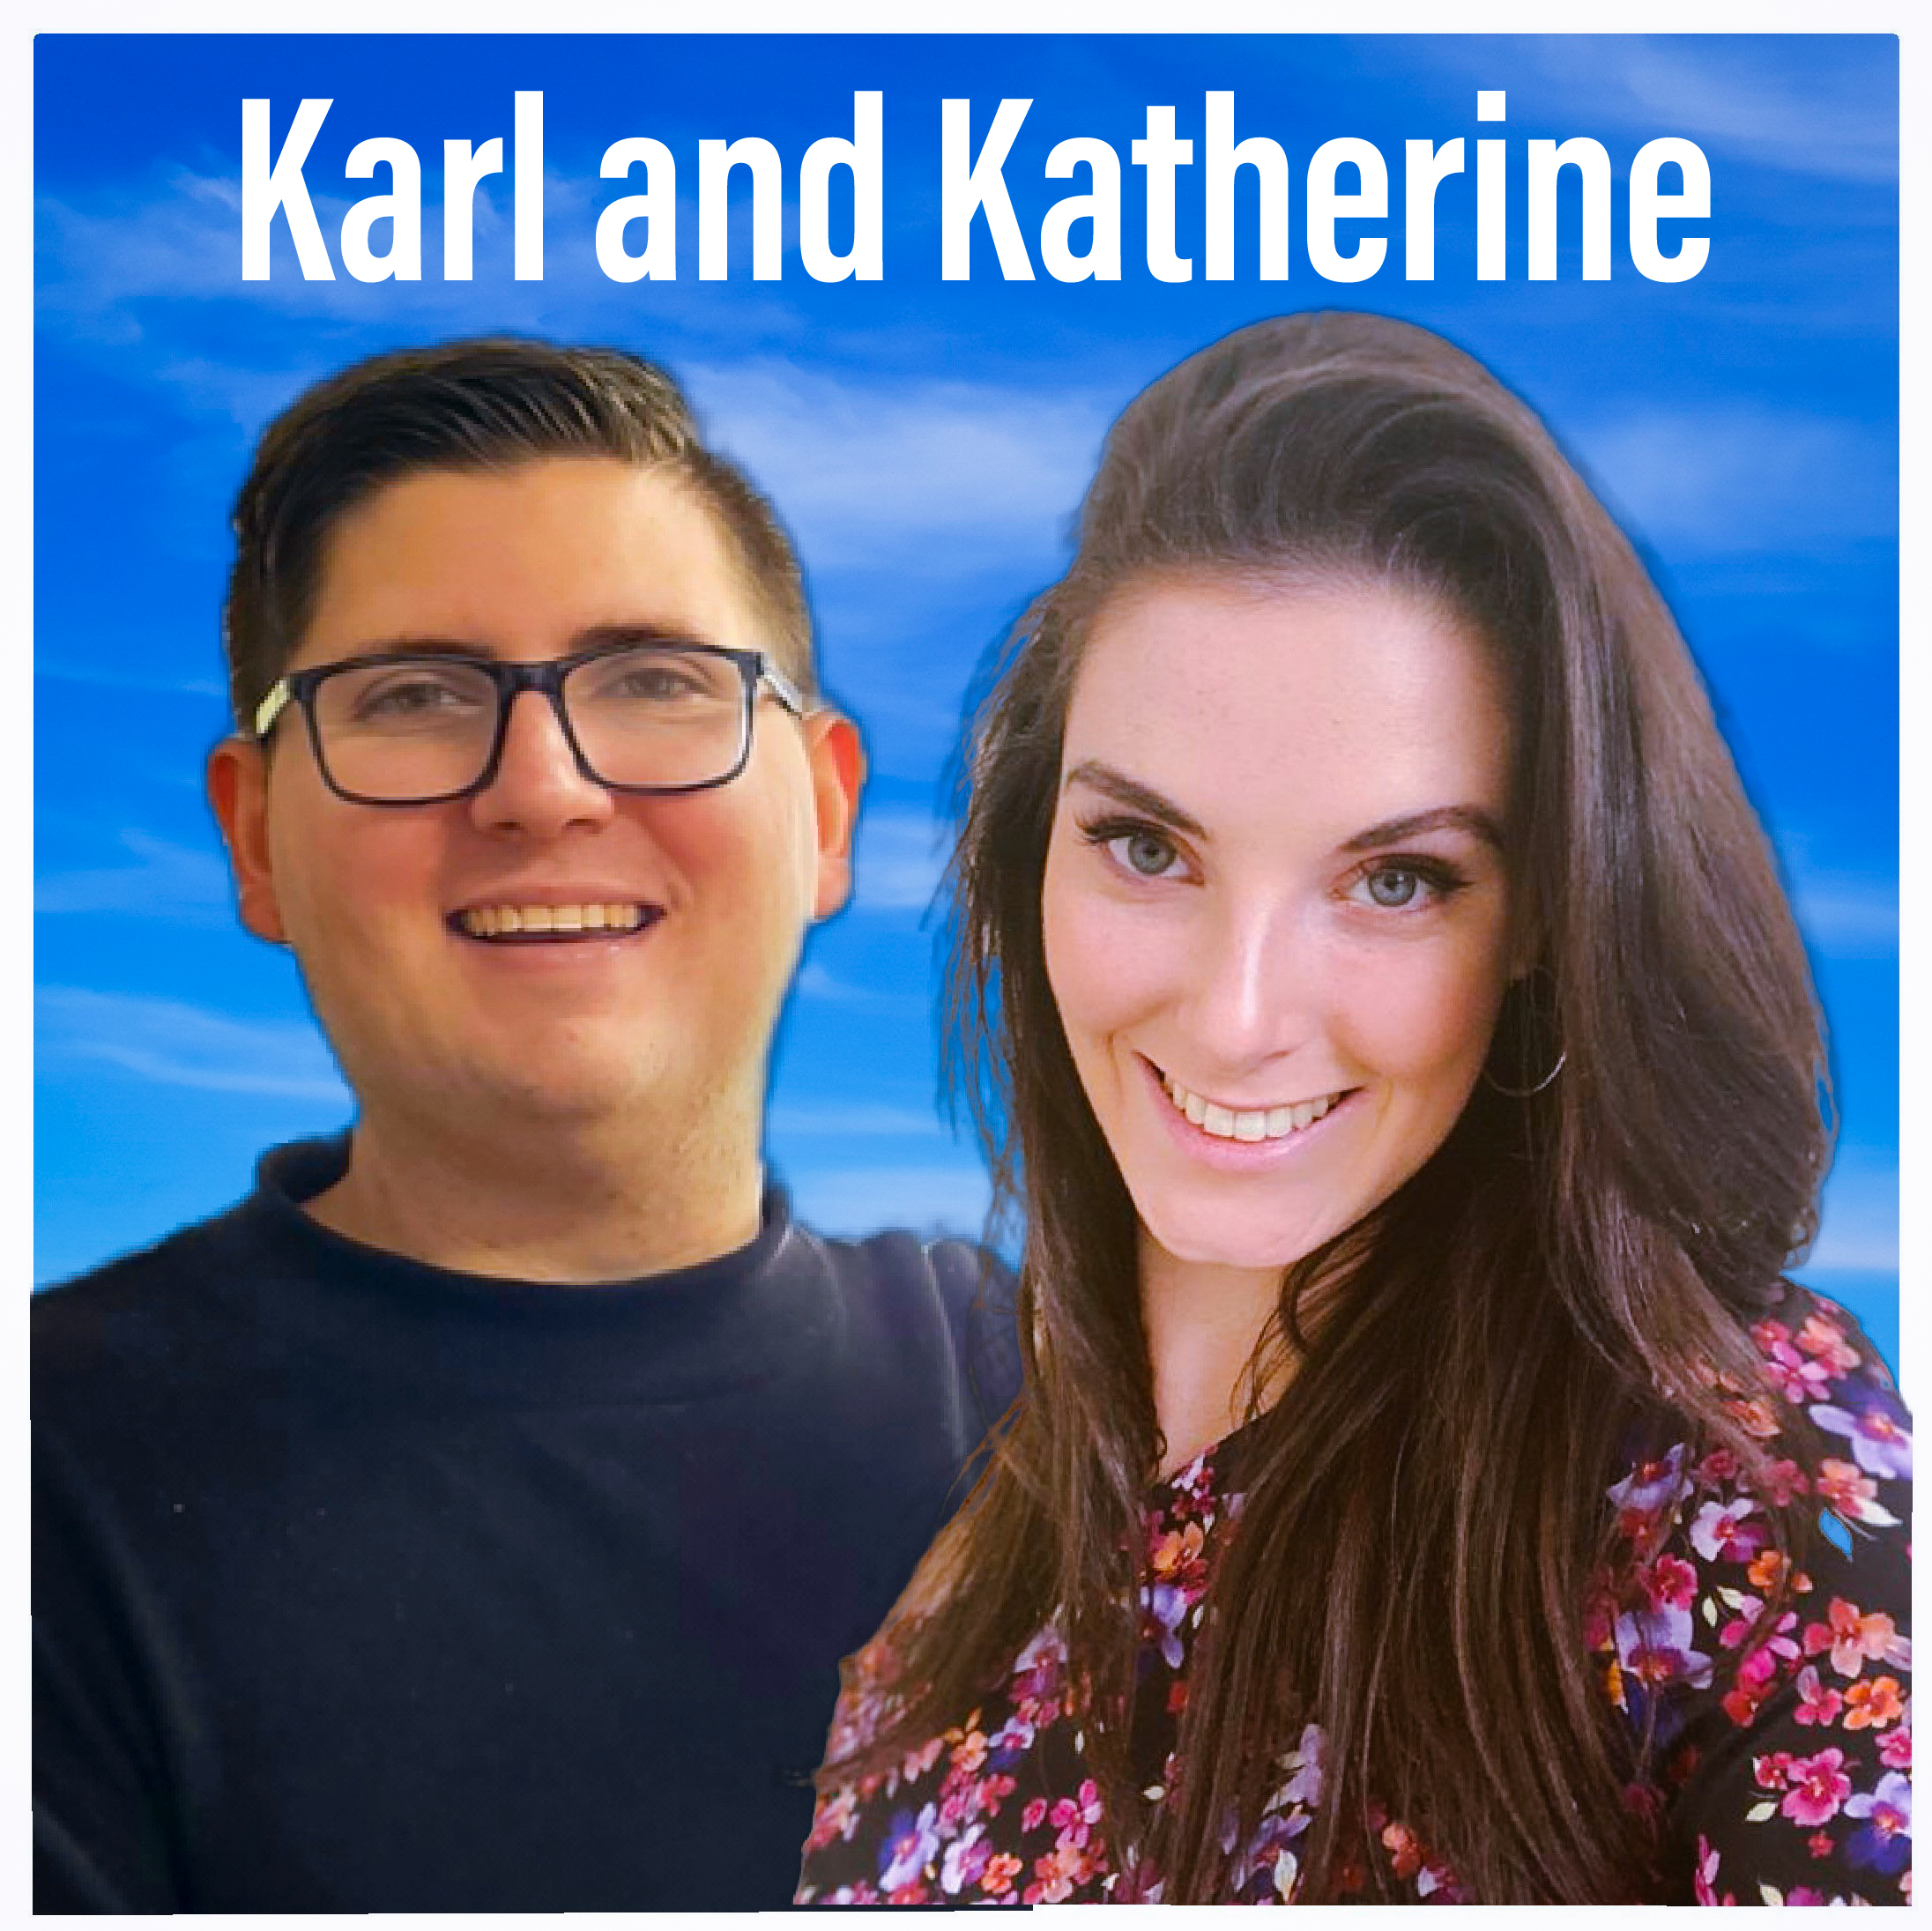 Karl and Katherine - Monday 21th June 2021